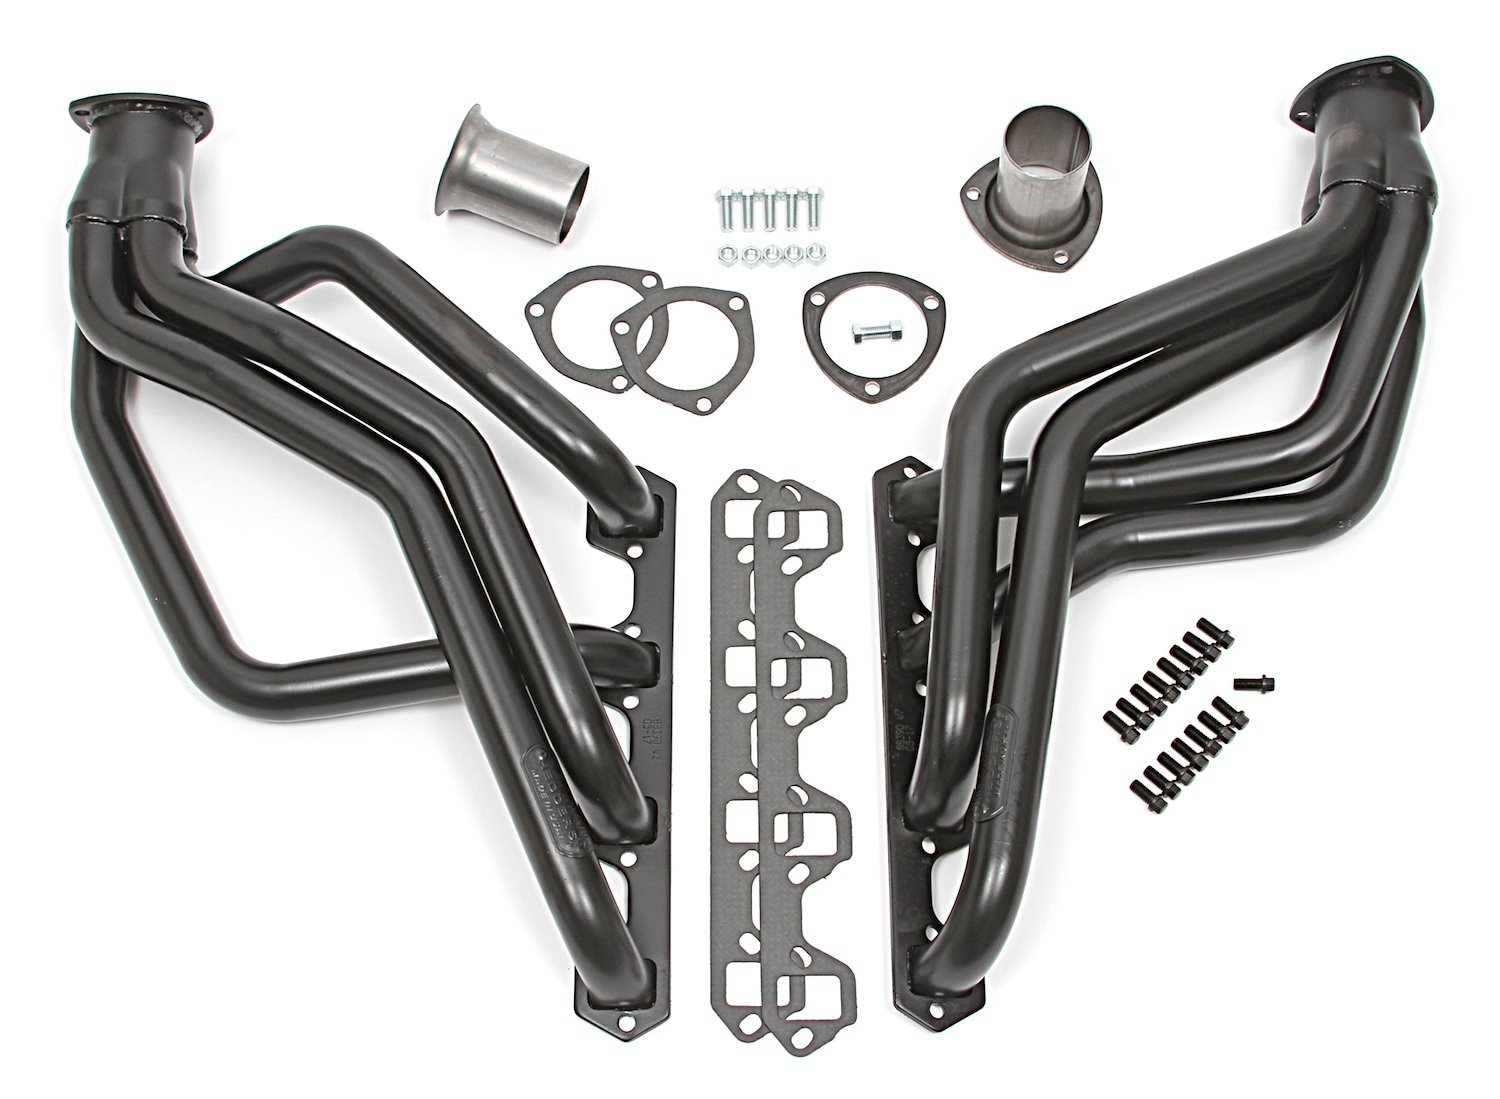 Standard Duty Uncoated Headers for 1979-93 Mustang 302W 5.0L